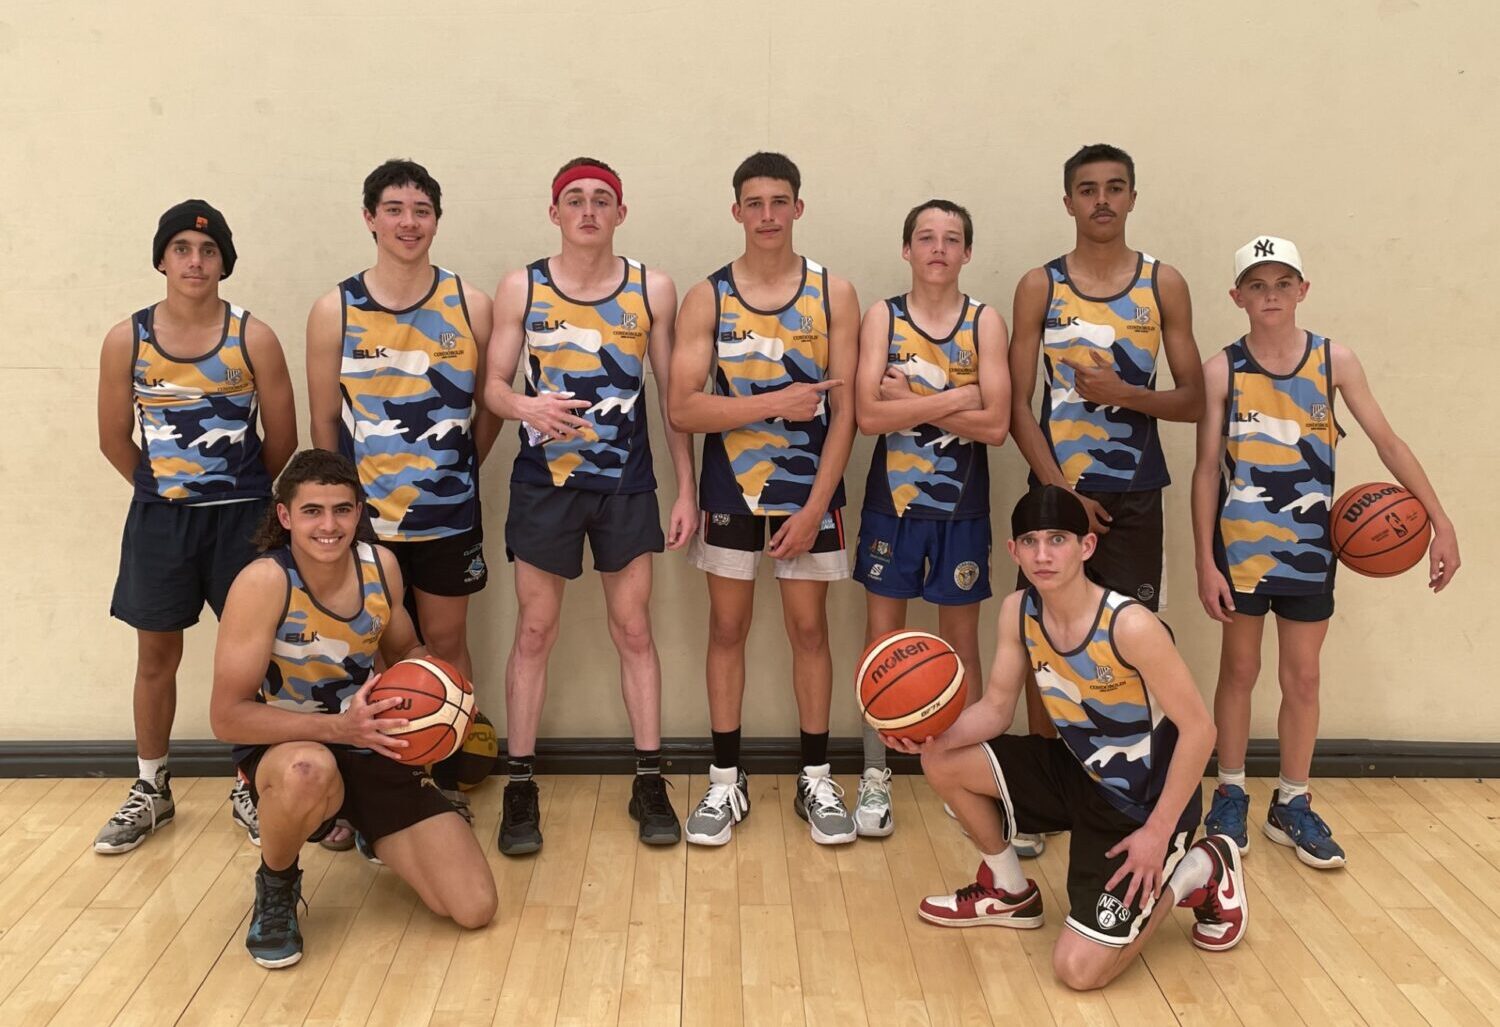 The Condobolin High School Under 15’s basketball team headed to West Wyalong for the Western Area Combined Basketball Tournament recently. They showed skills and determination at the event. Image Credit: Condobolin High School Facebook Page.